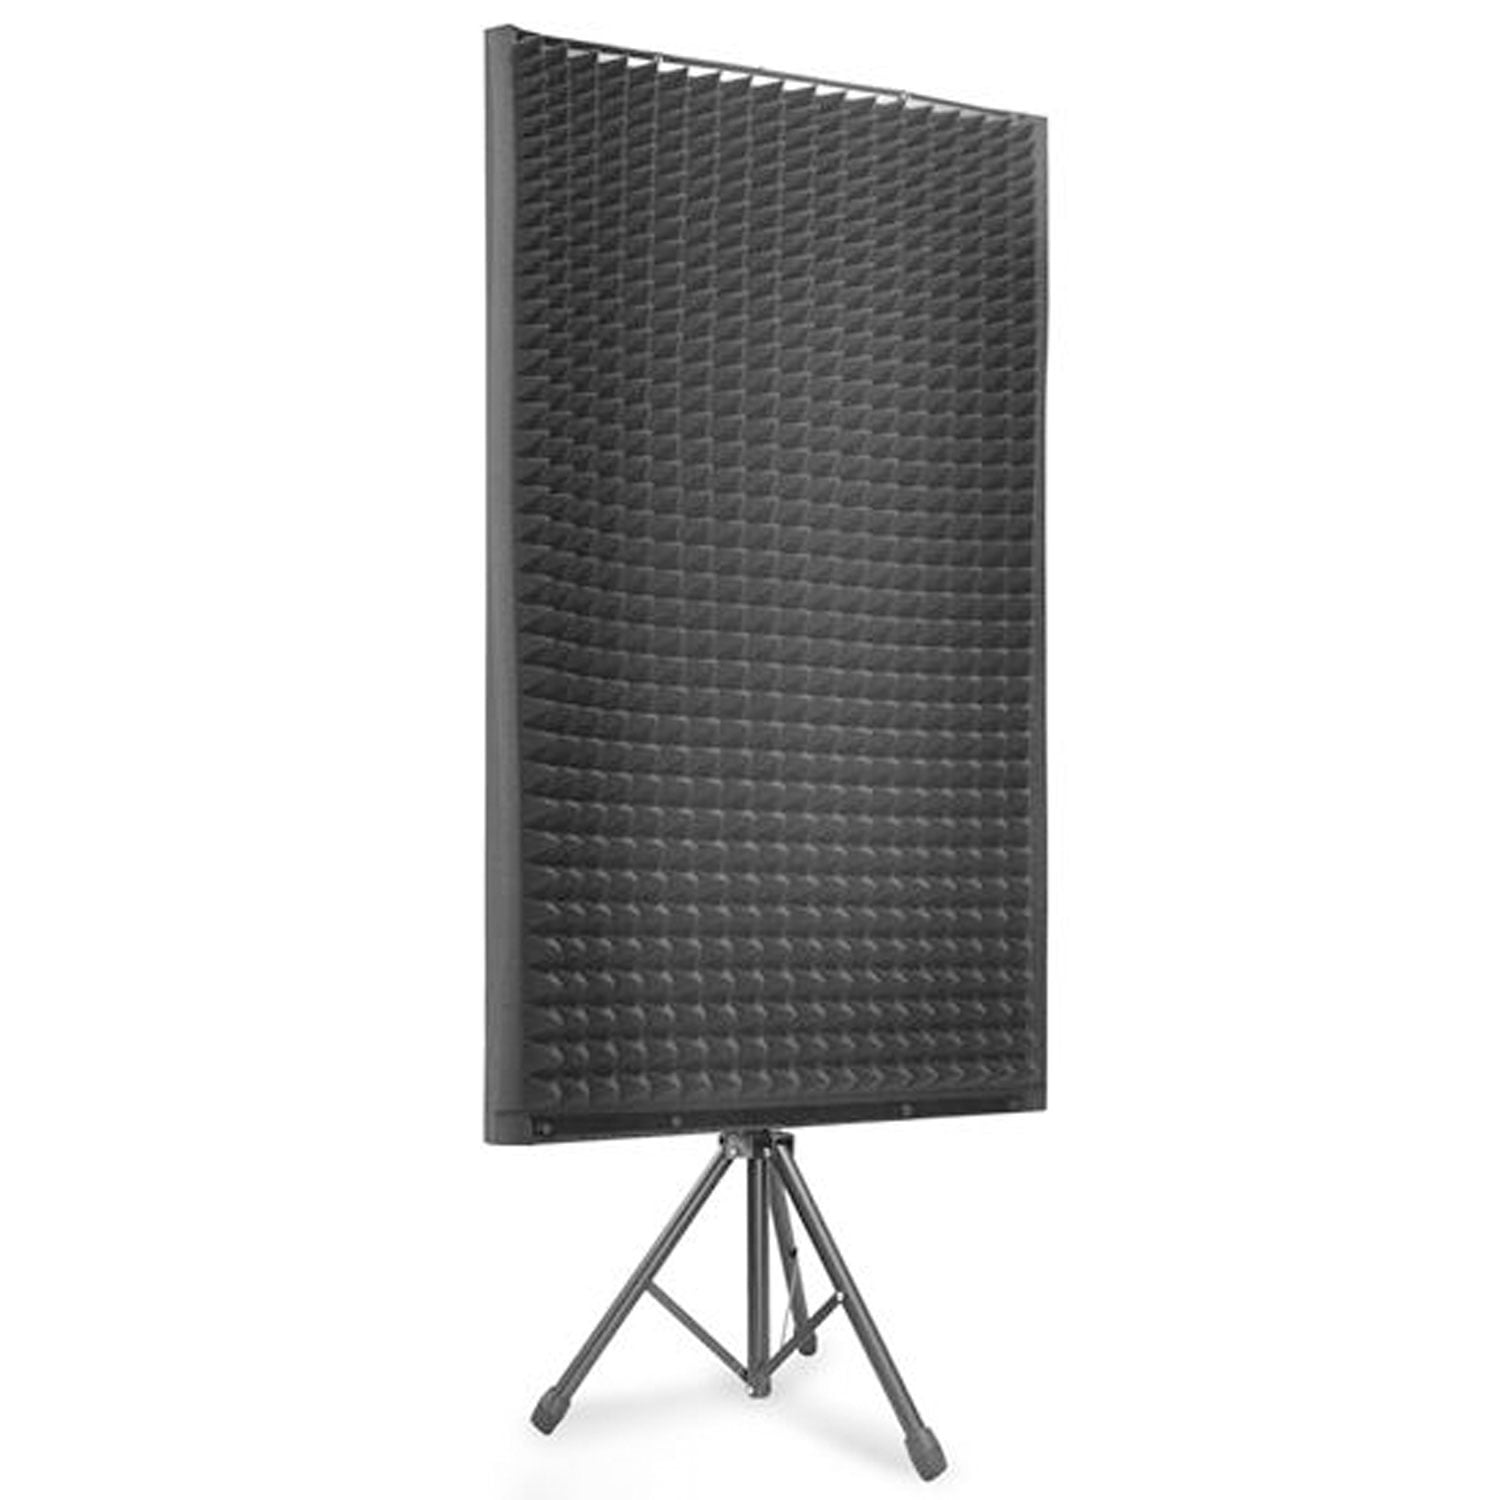 Acoustic Panels 2 Thick, 12 Pack Sound Proof Foam Panels Peel and Stick, Noise  Dampening Foam Acoustical Wall Panels Stripe for Studio Gaming Room  Bedroom, Sound Foam Padding Blue, 12x12x2 inches 